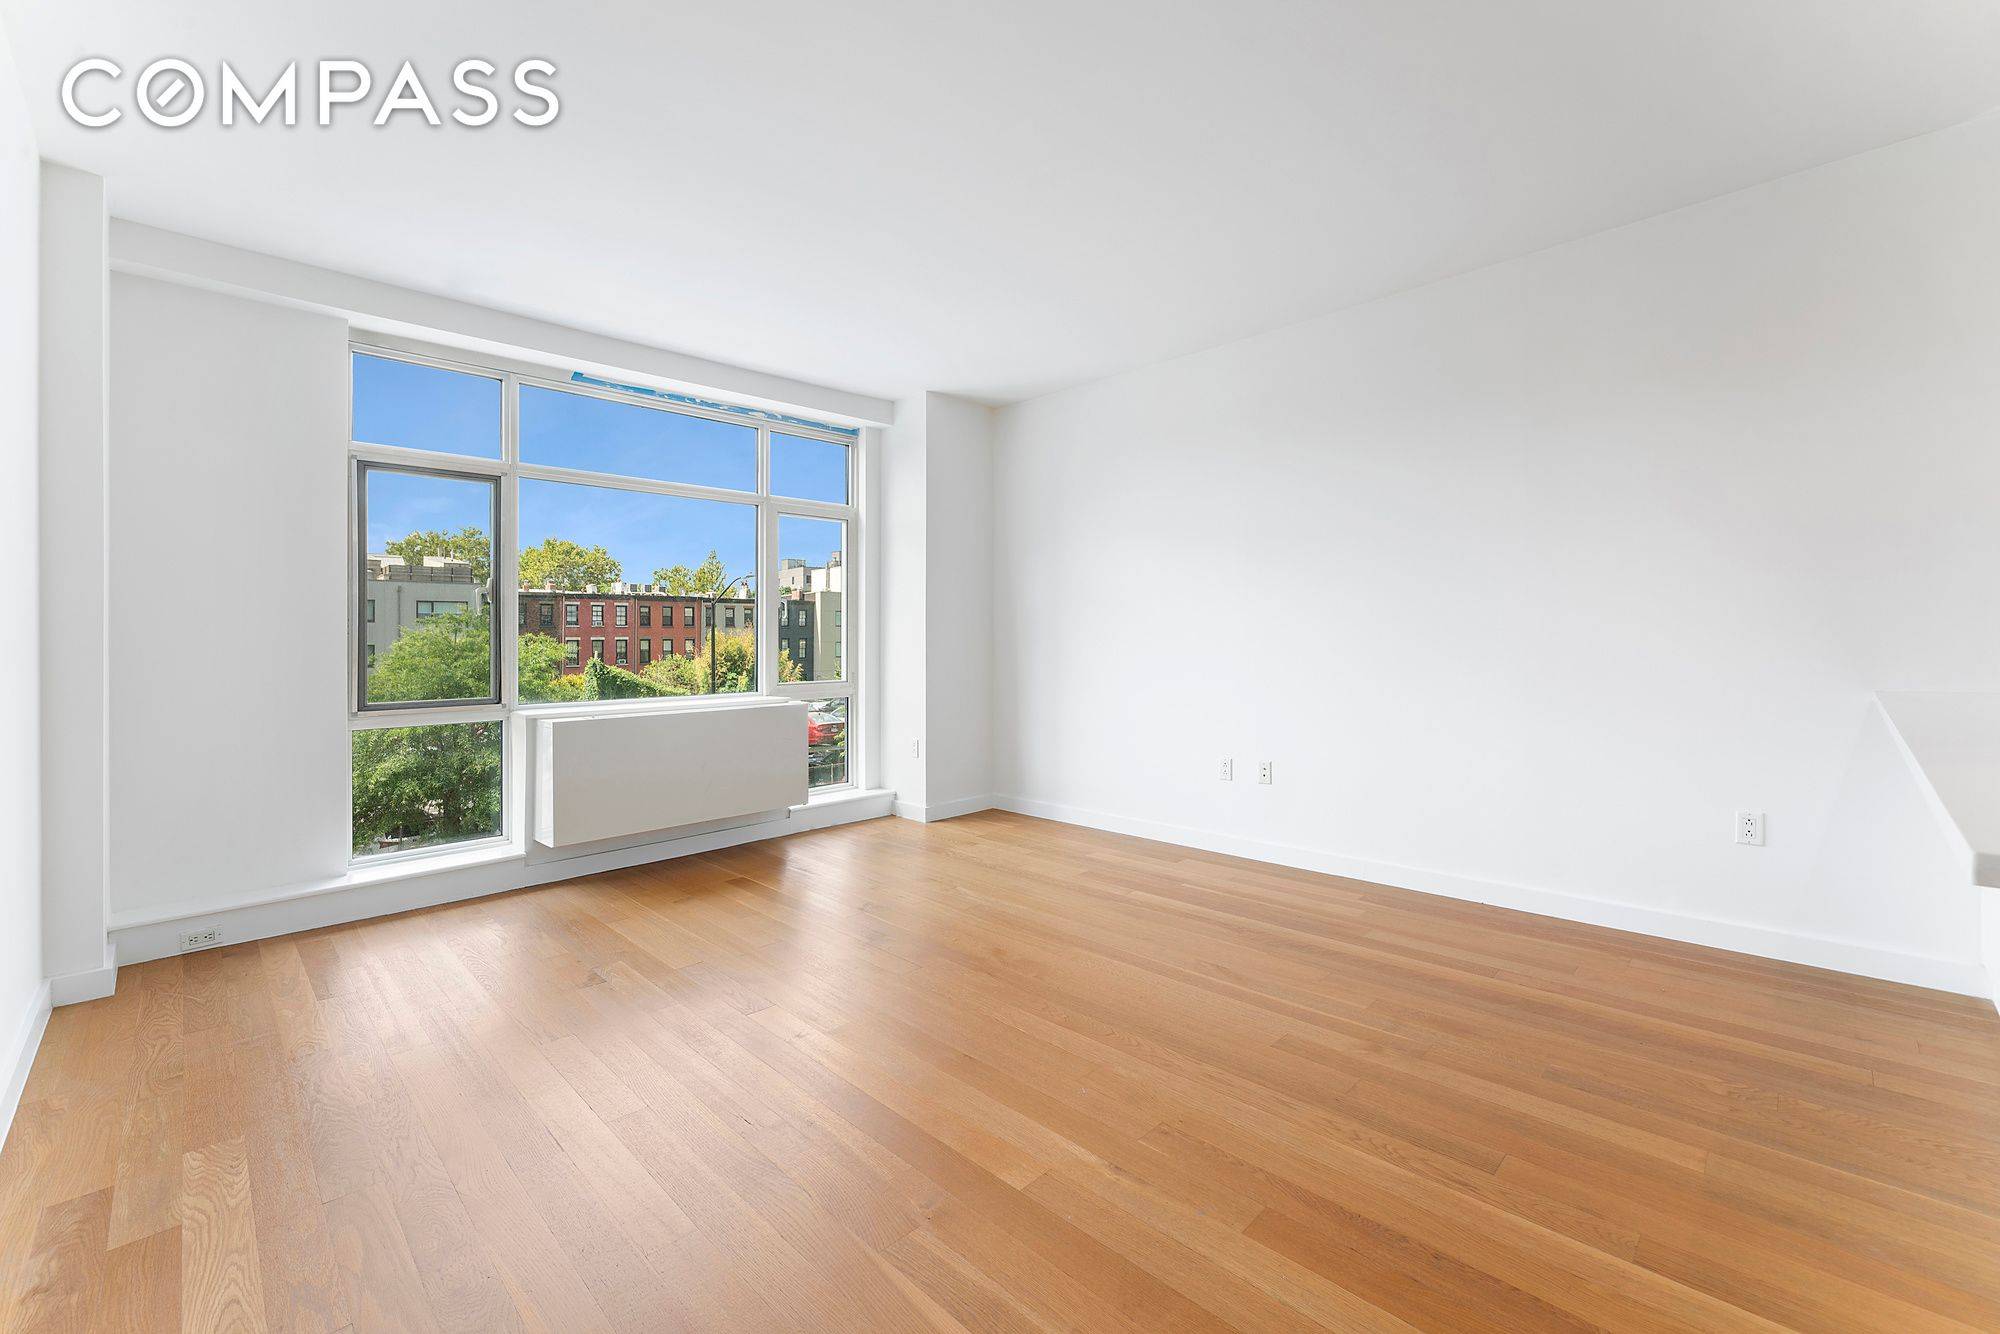 Floor to ceiling windows and wide plank hardwood floors greet you as you enter the south facing unit.